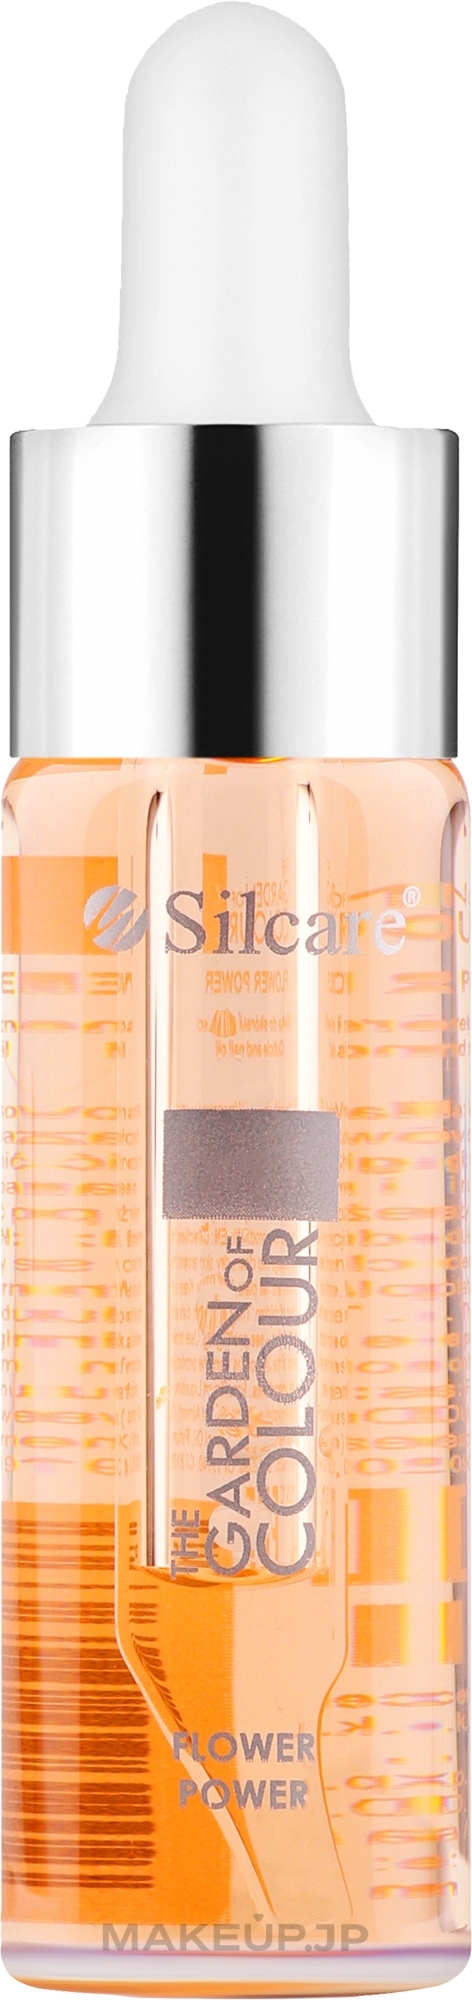 Nail & Cuticle Oil with Pipette - Silcare Garden of Colour Cuticle Oil Flower Power — photo 15 ml